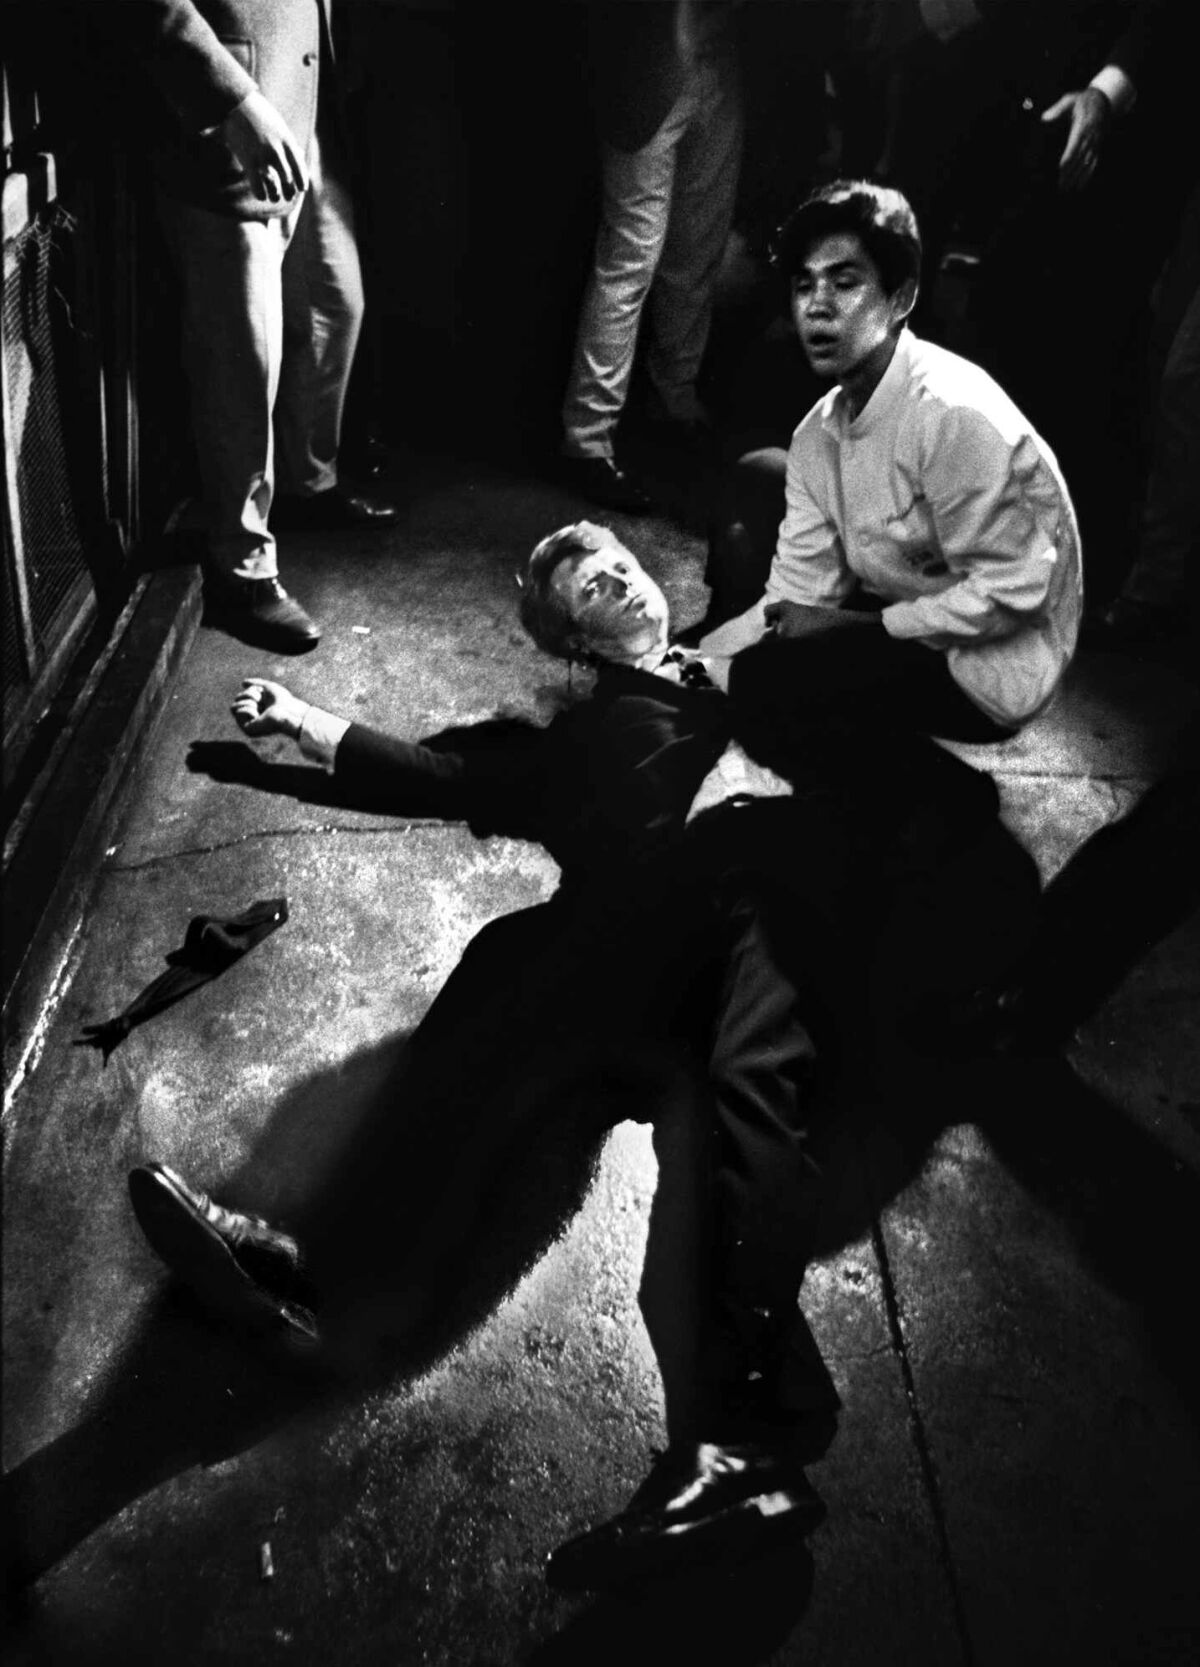 Robert F. Kennedy on the floor at the Ambassador Hotel after being shot.